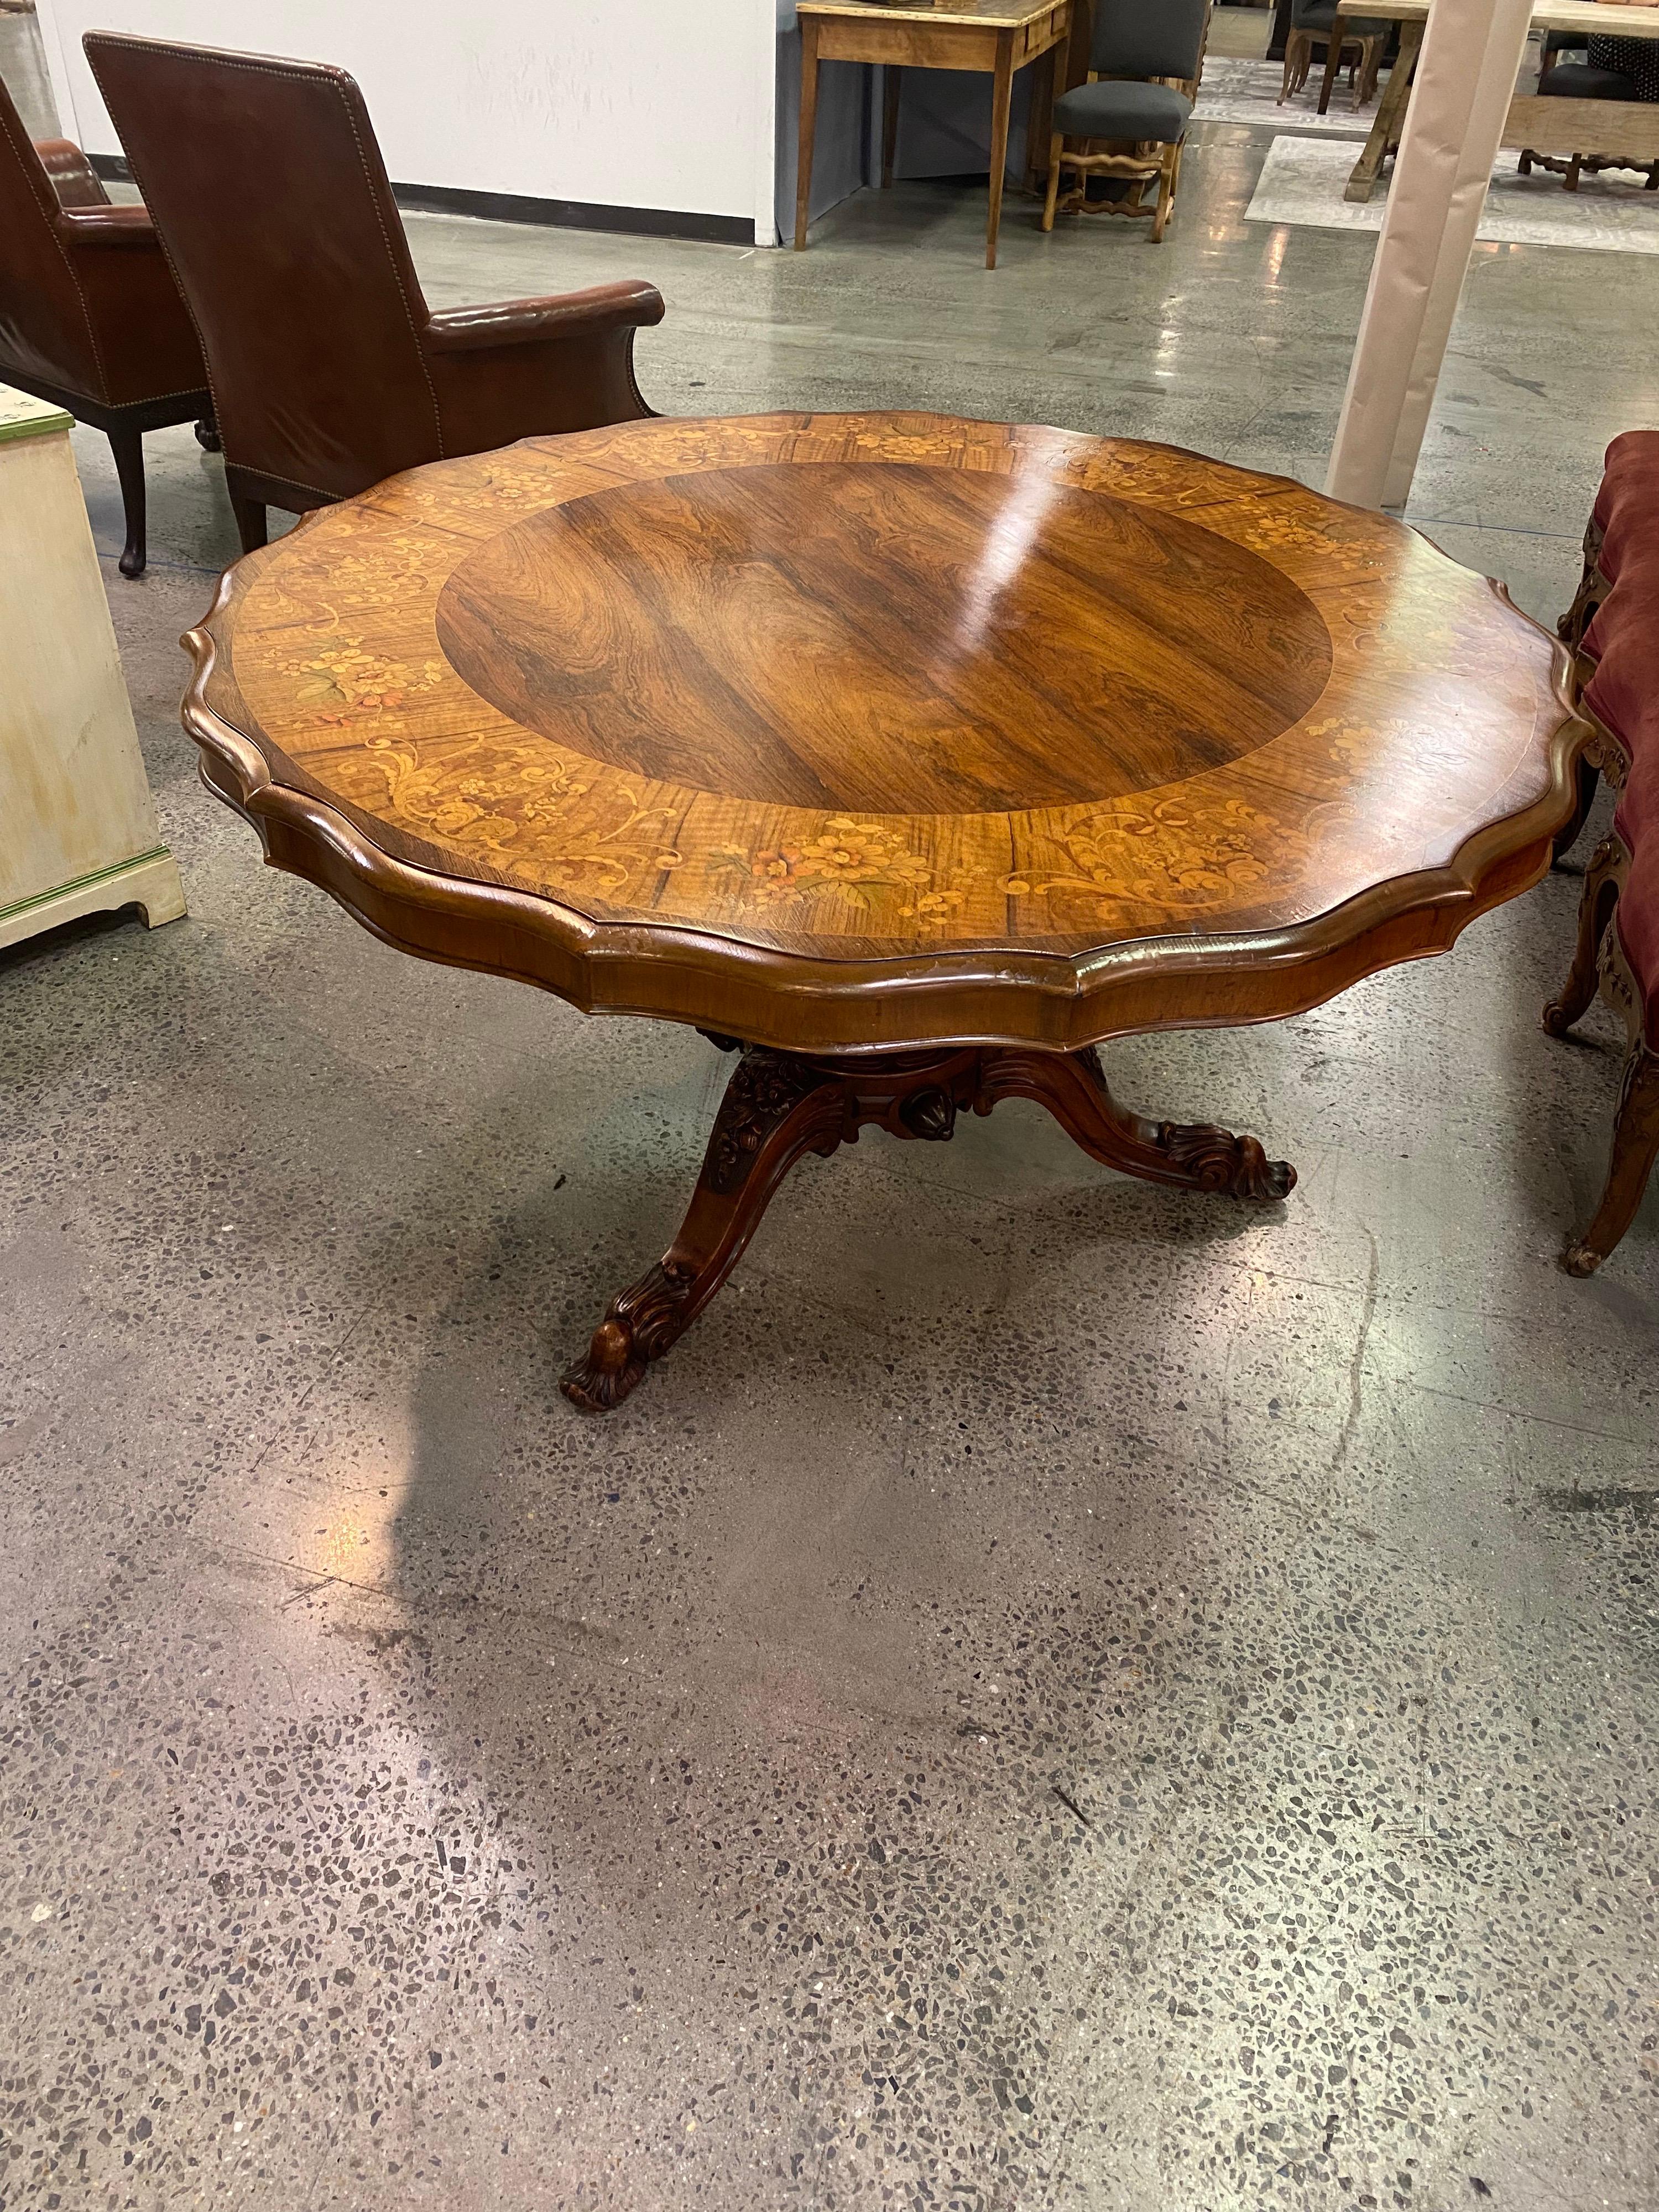 Exceptional and important singed 19th century signed Irish rosewood center table with polychrome floral marquetry inlay. Beautifully carved pedestal base. Top is shaped and inlaid with crossbanding and red and green stained marquetry floral inlay.